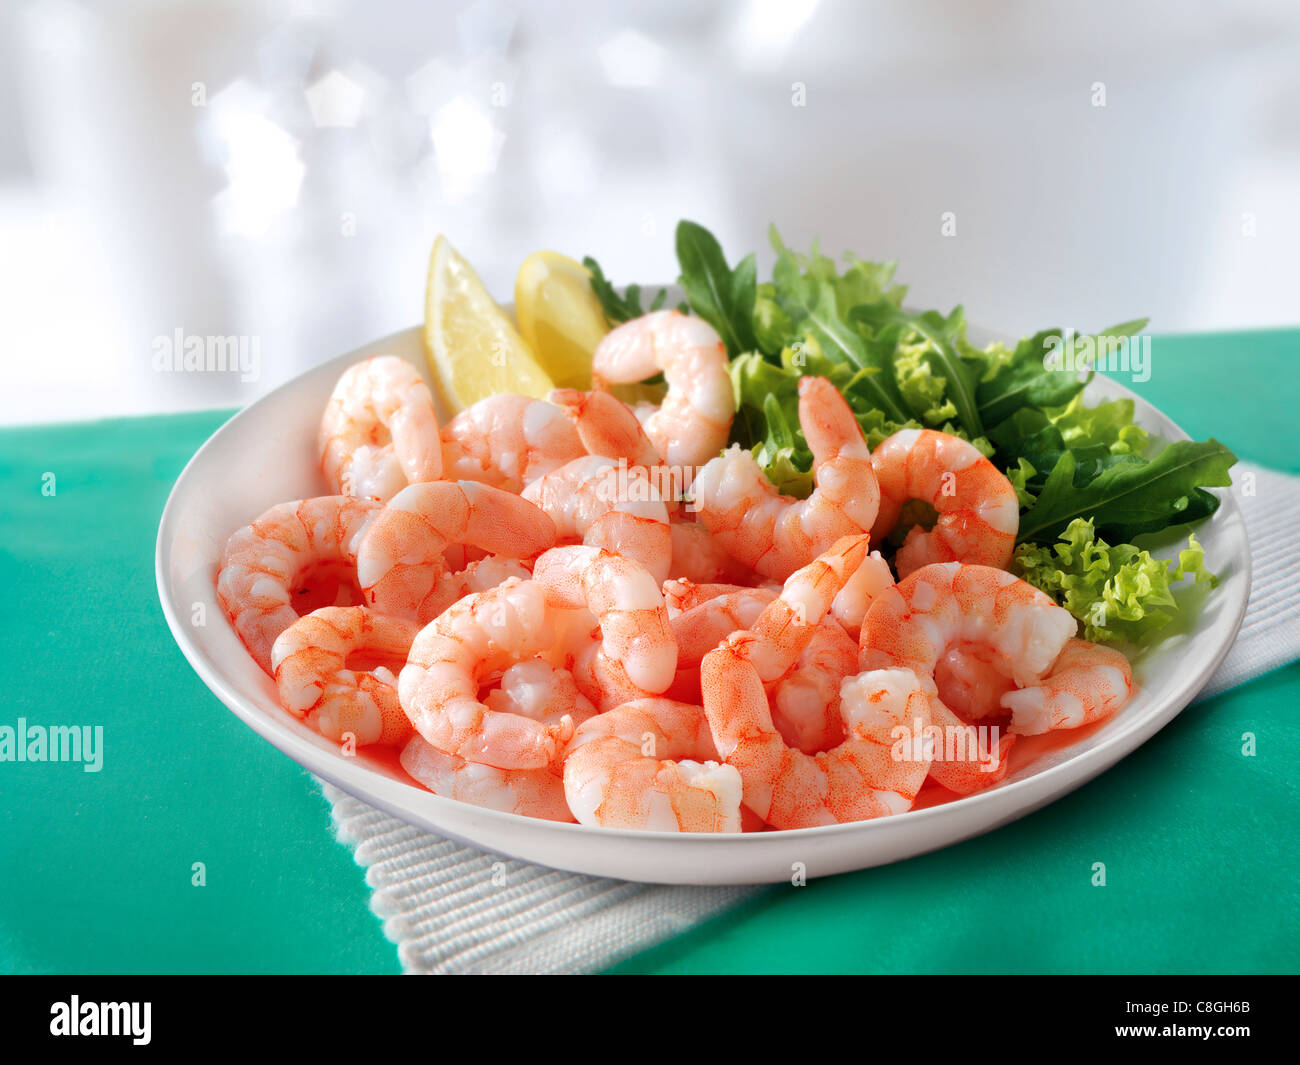 Fresh cooked prawns & salad served on a plate ready to eat Stock Photo